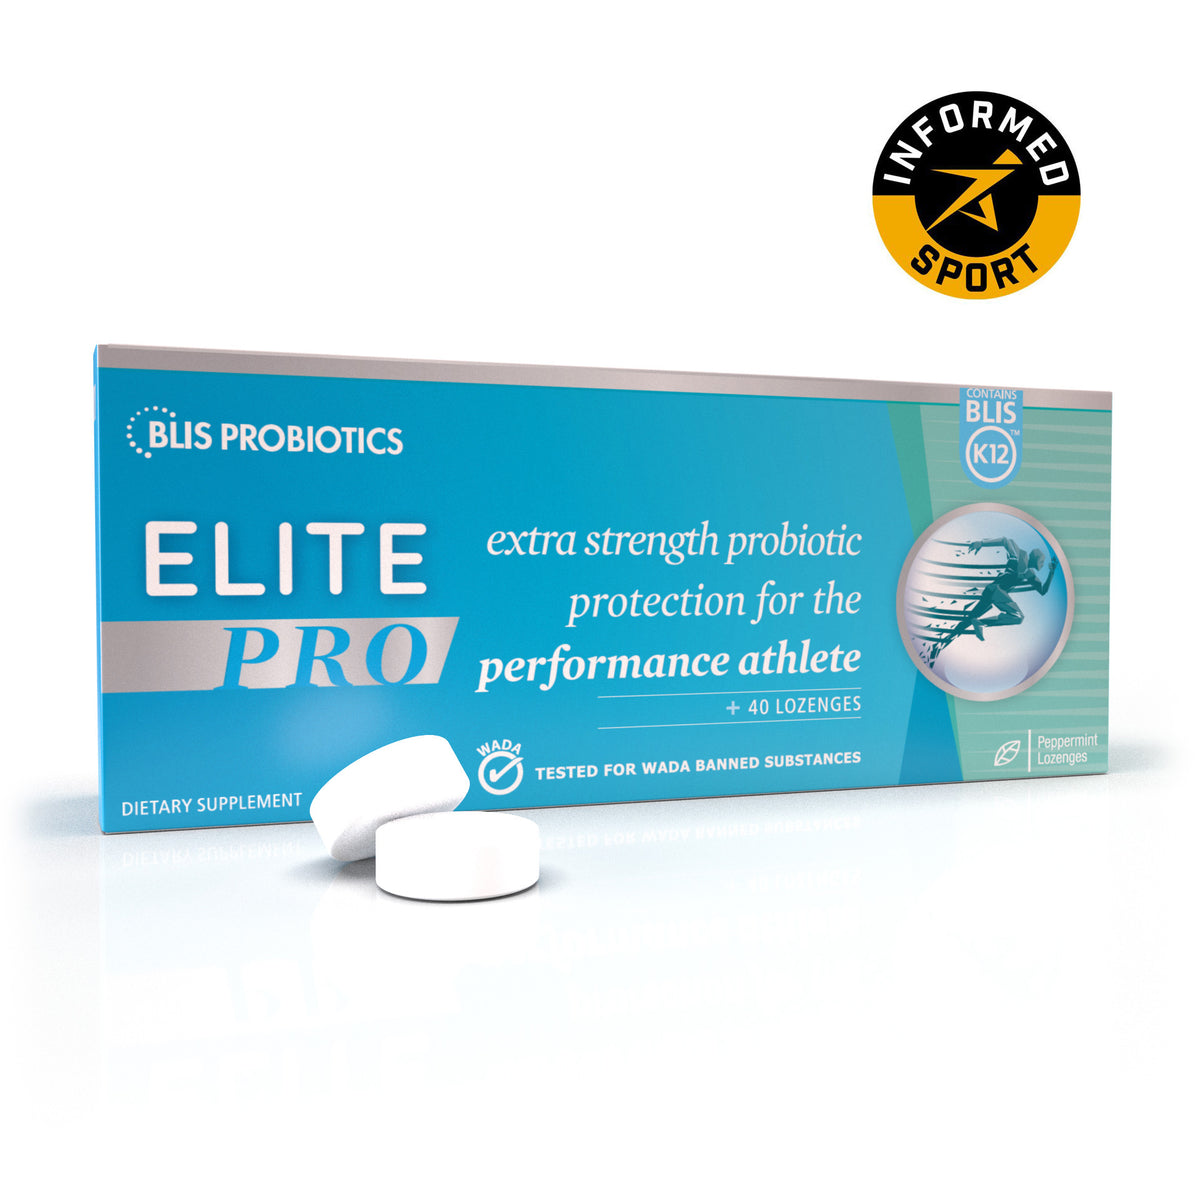 Elite Pro - extra strength probiotic protection for the performance athlete